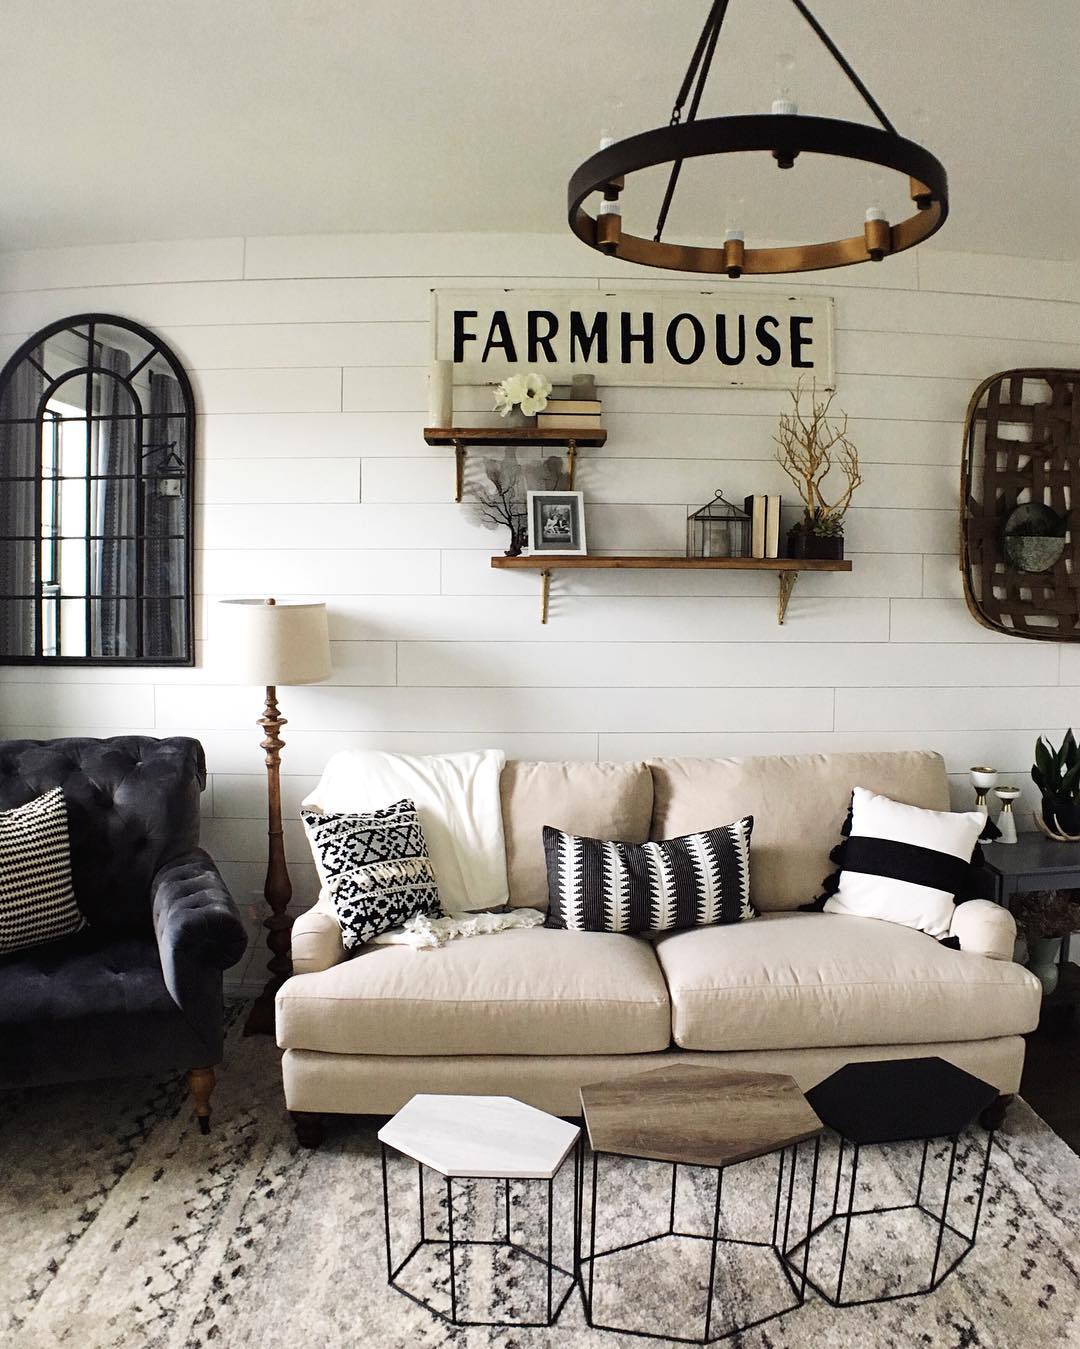 Three nesting tables in farmhouse style living room. Photo by Instagram user @thewhitesabode